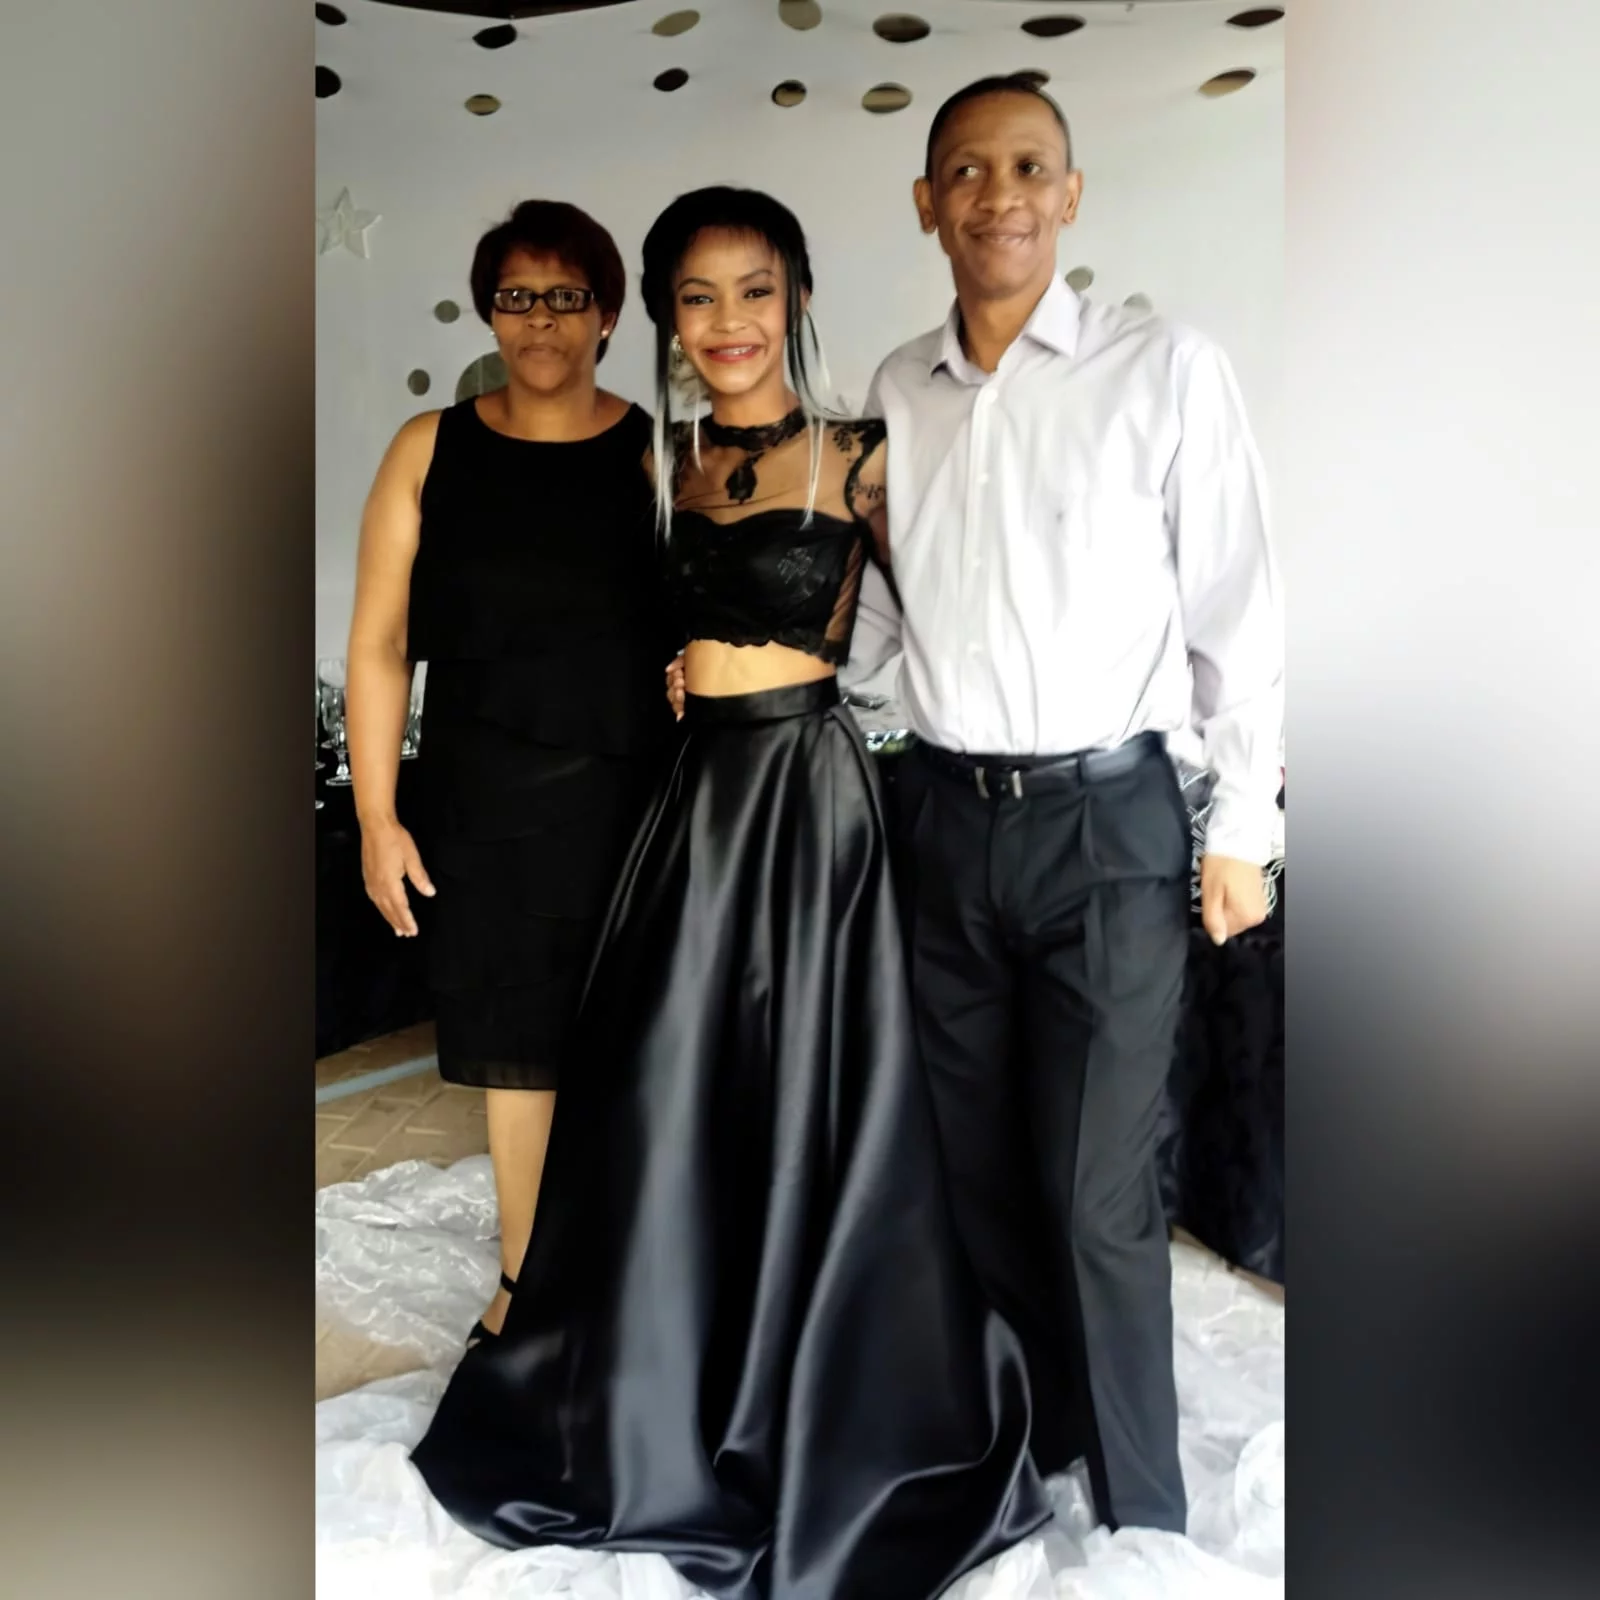 2 piece black prom dress with lace top 3 my client looked stunning in the 2 piece black prom dress i created for her. A lace top with sheer neckline and long sleeves, with a diamond shape opening. With a wide, flowy duchess's satin skirt